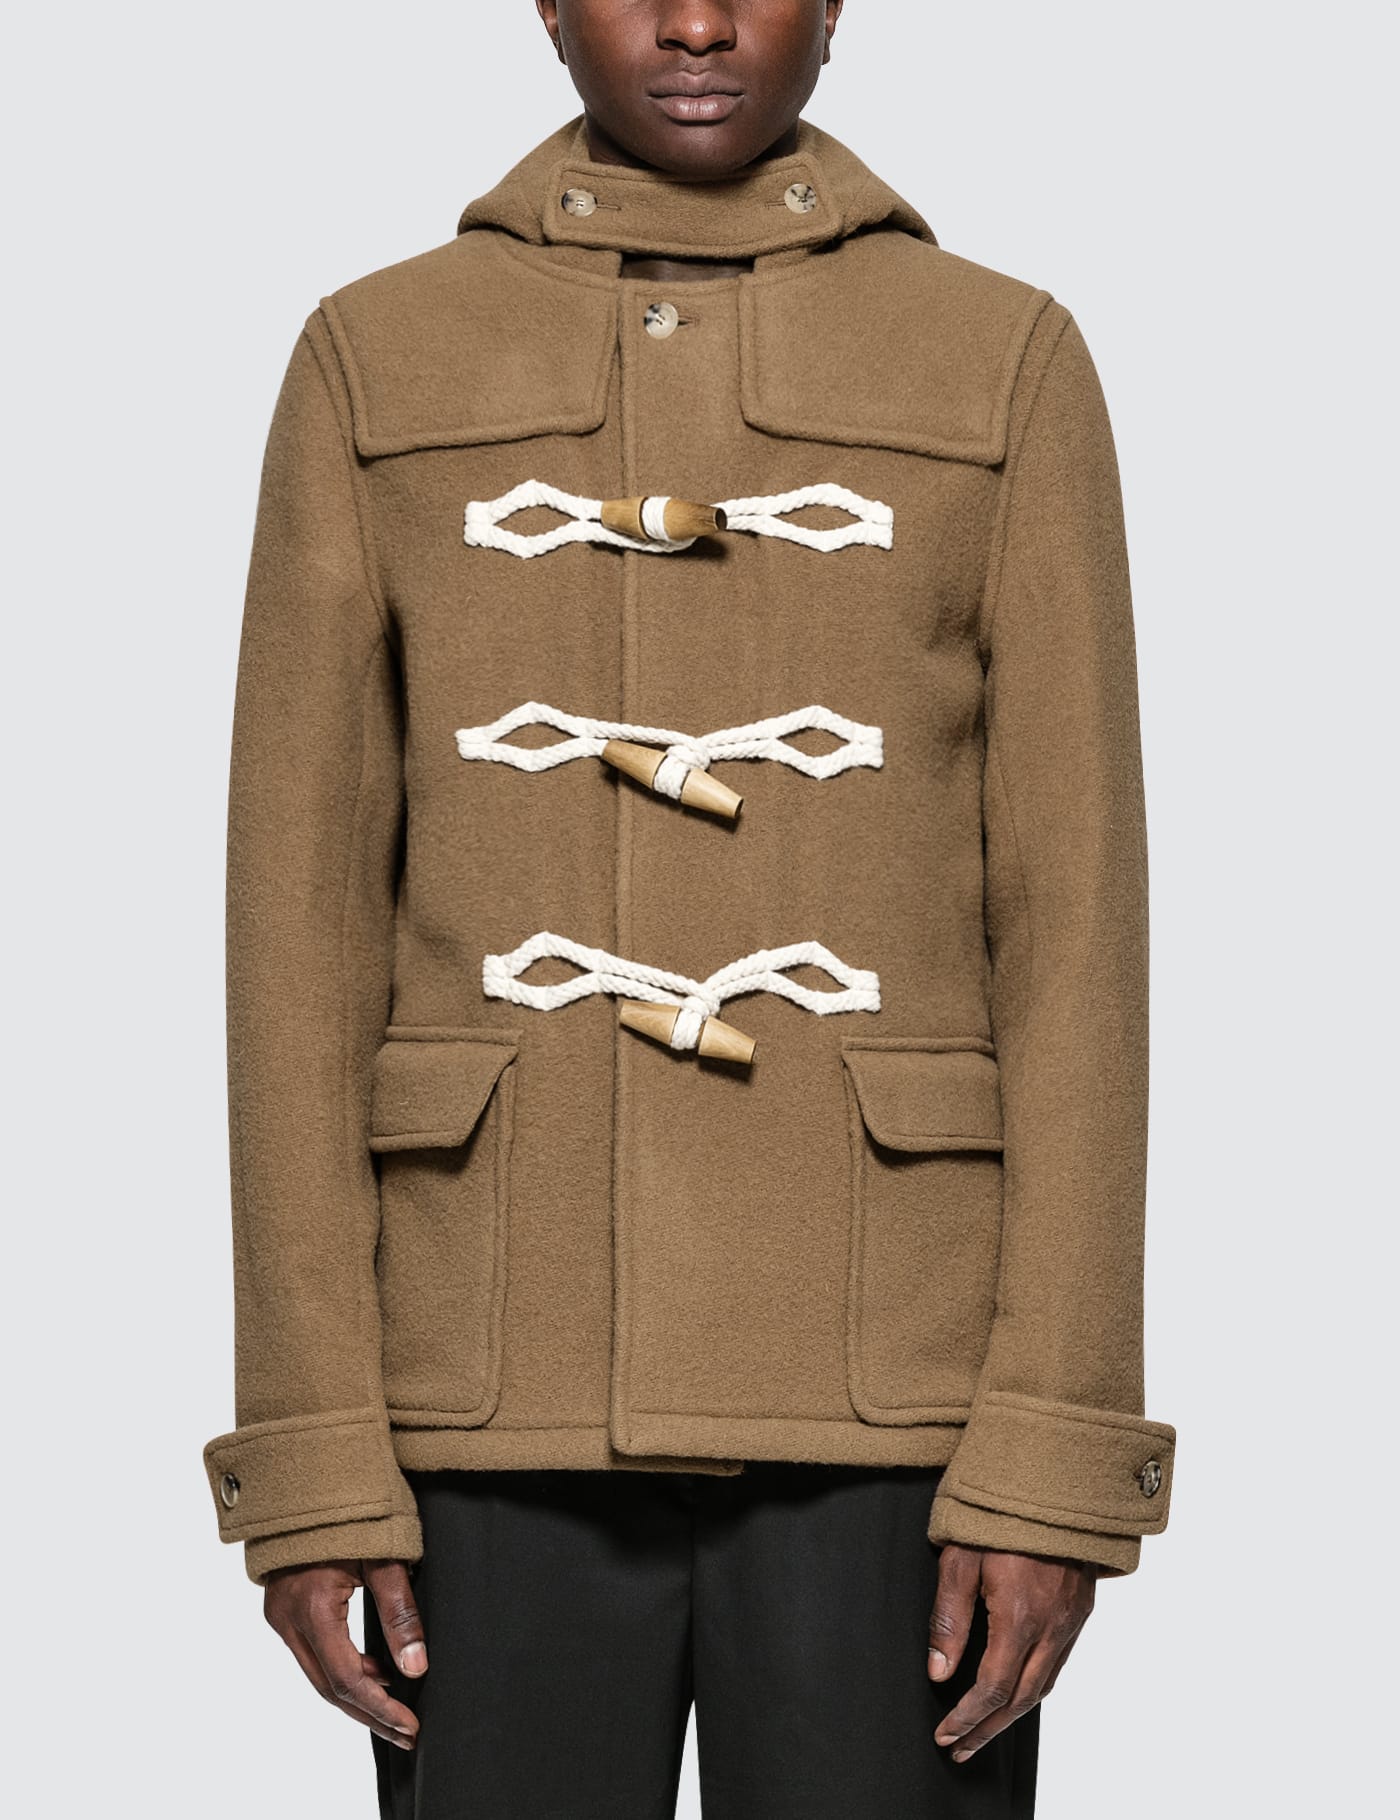 JW Anderson - Duffle Coat | HBX - Globally Curated Fashion and